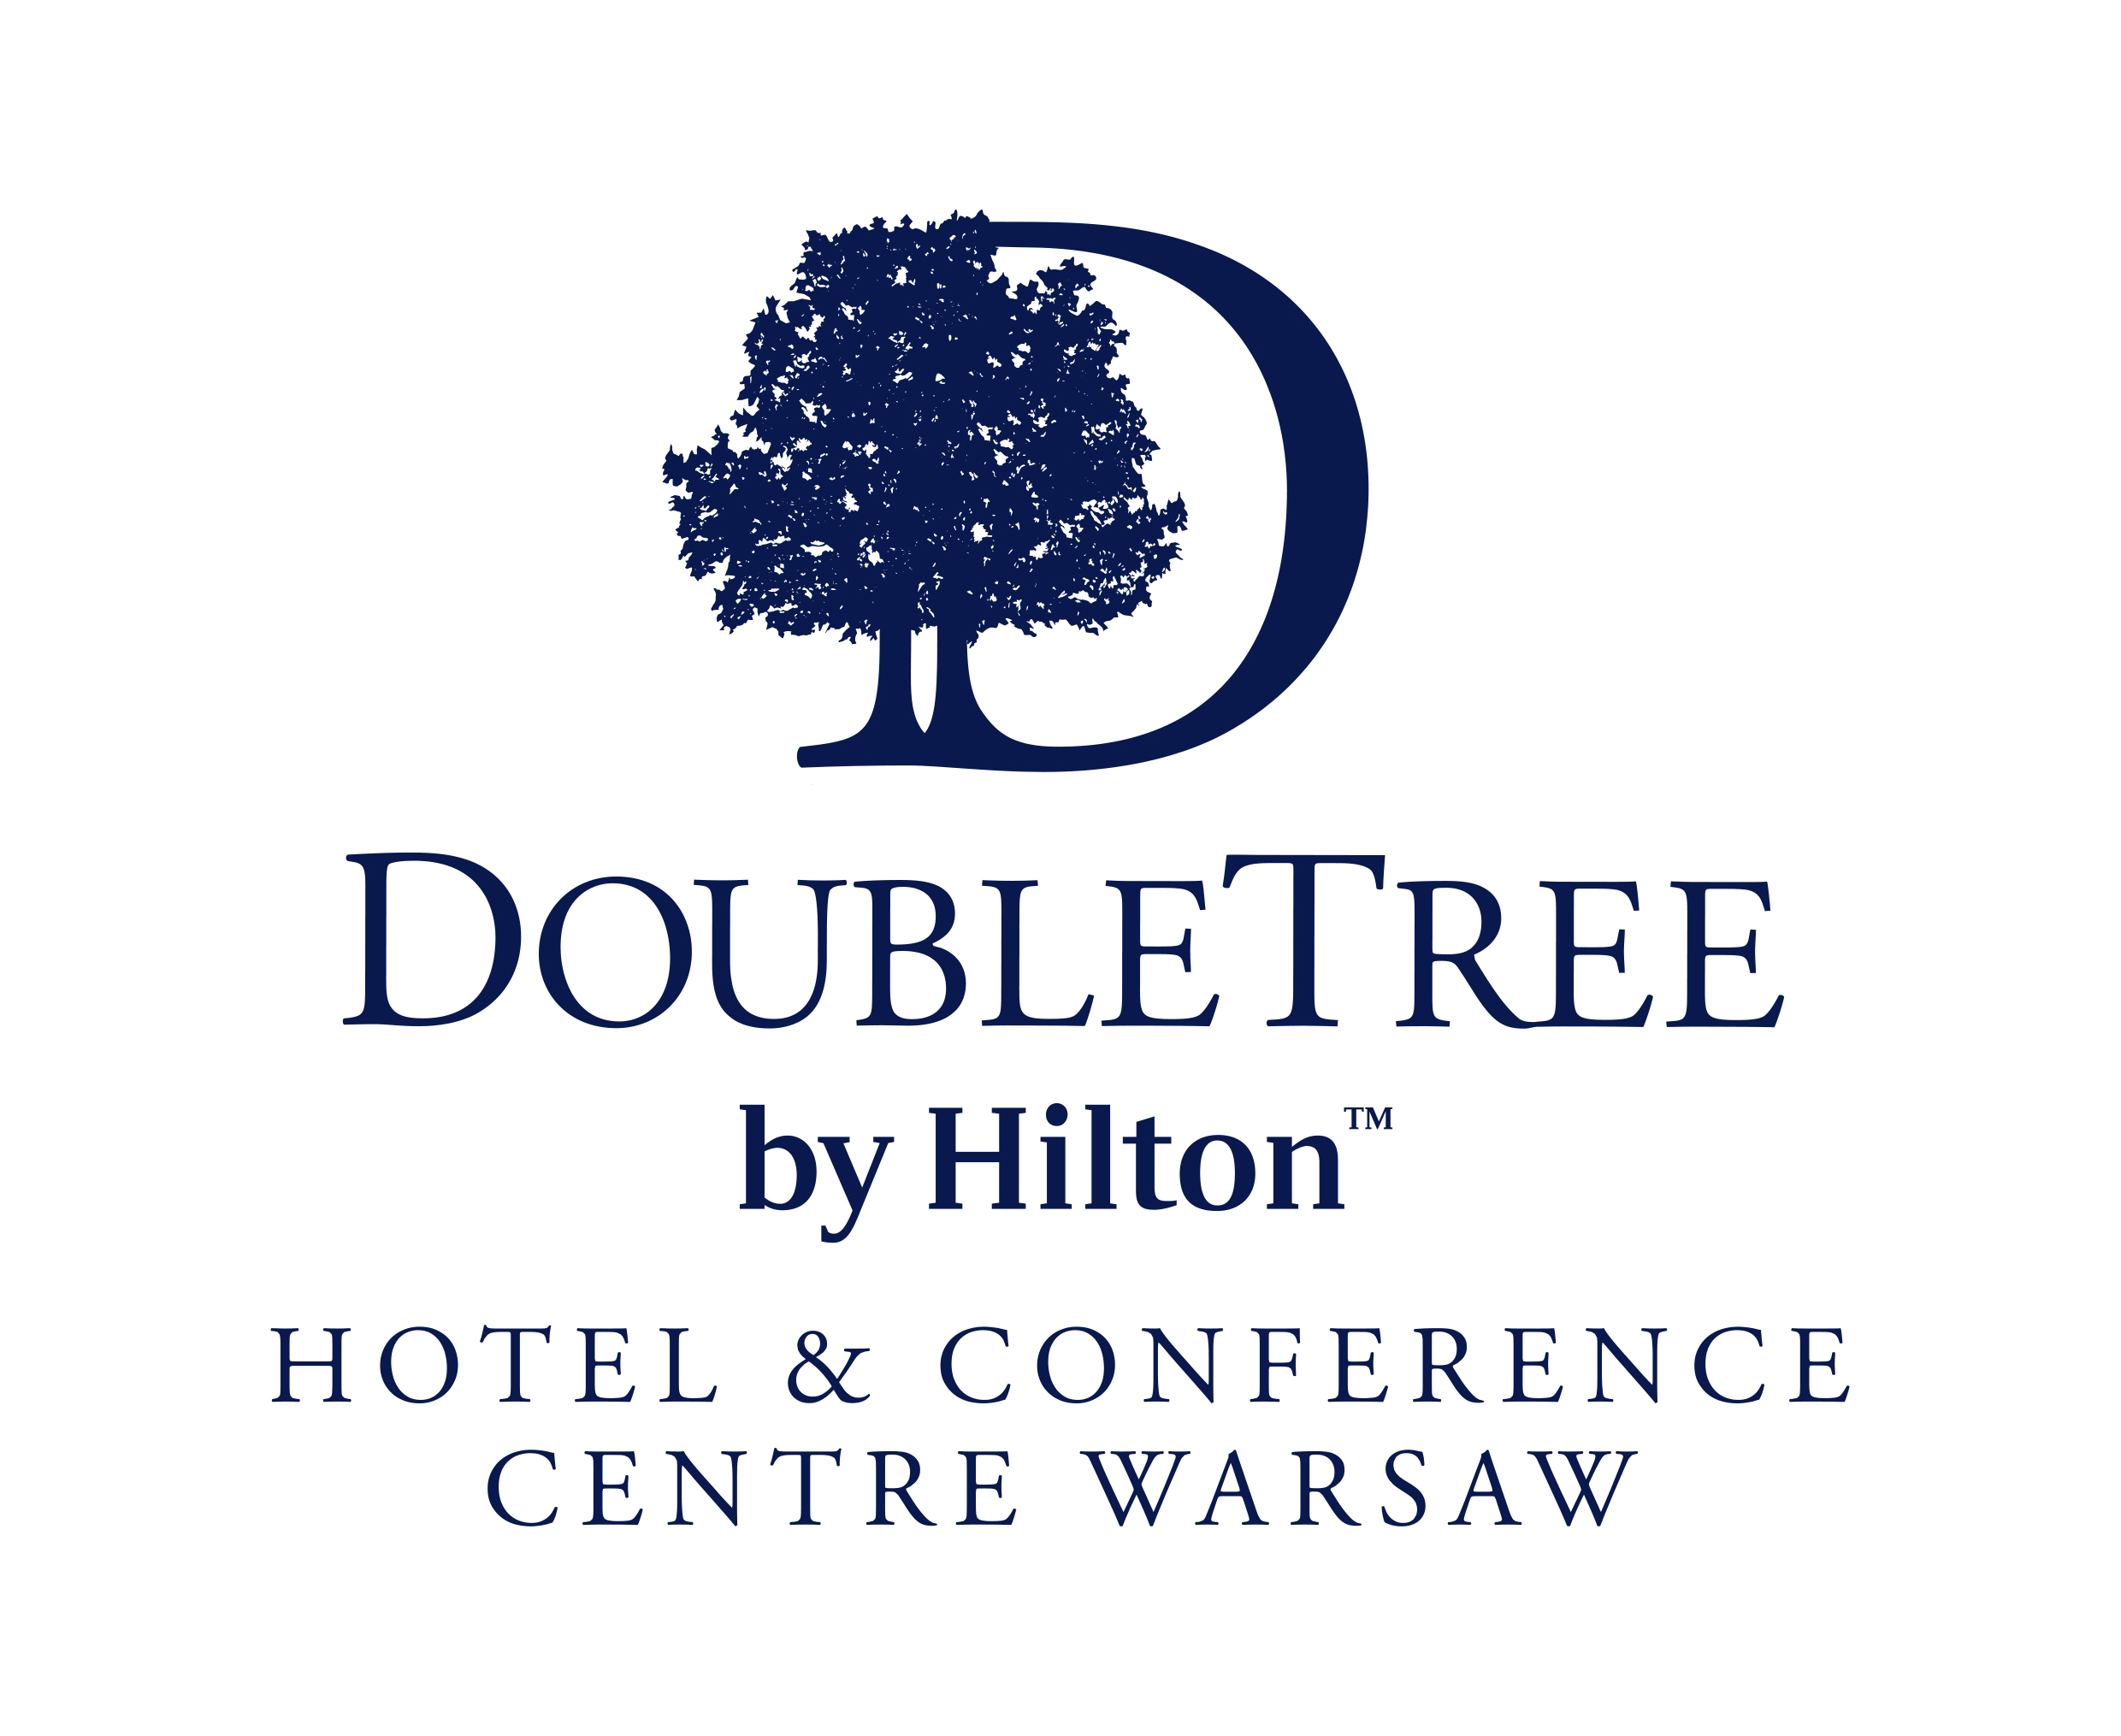 DoubleTree by Hilton Hotel & Conference Center Warsaw